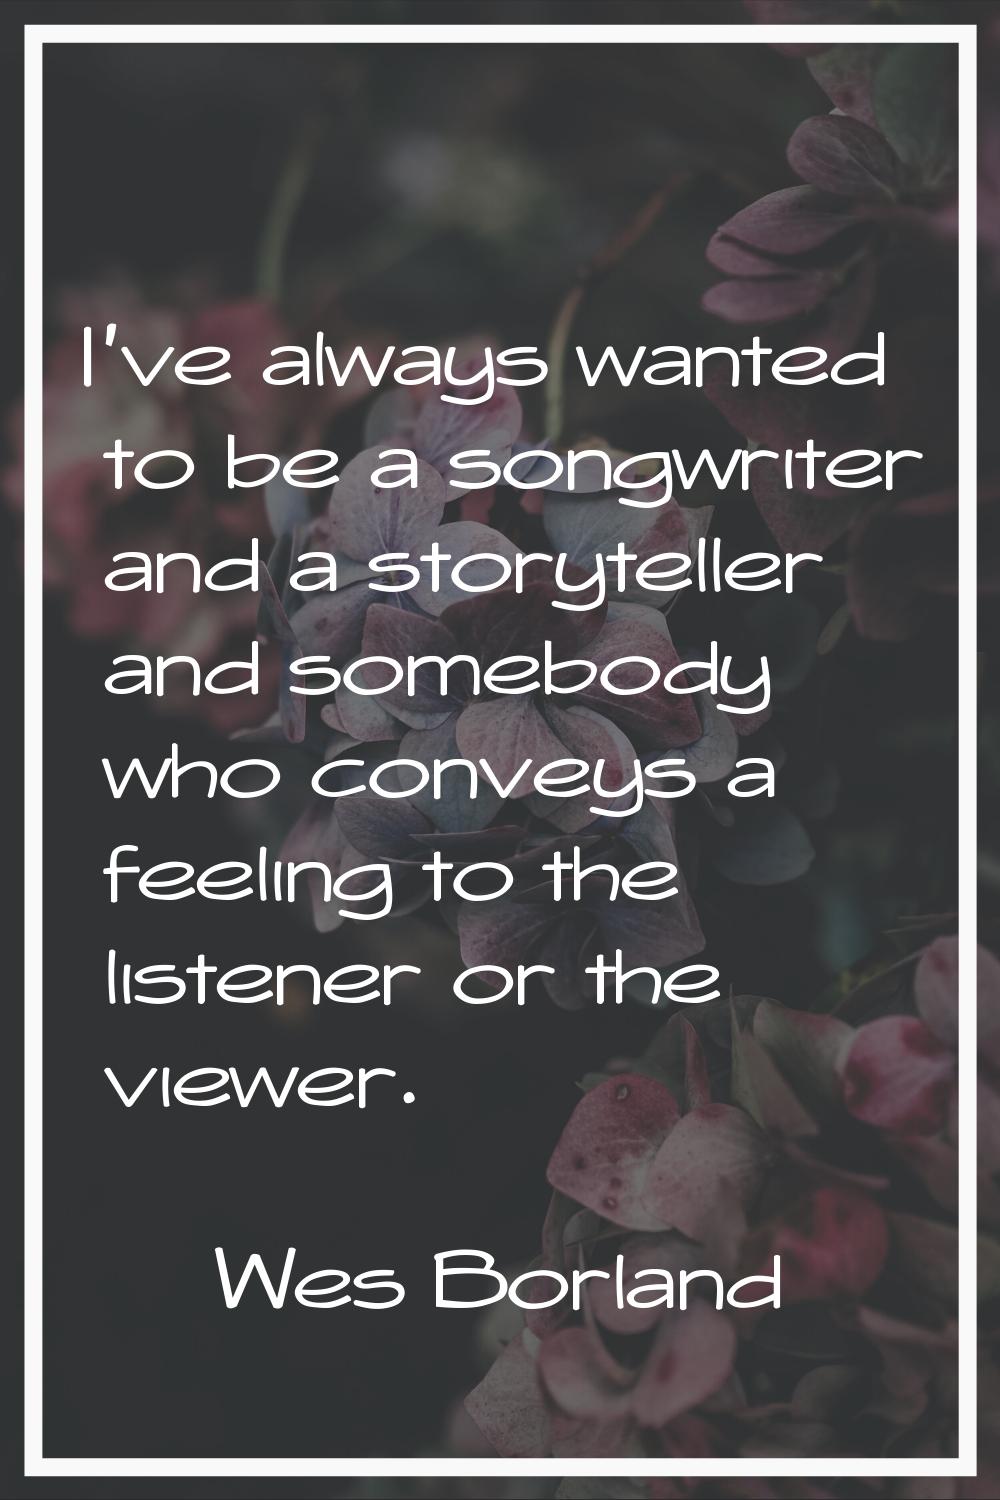 I've always wanted to be a songwriter and a storyteller and somebody who conveys a feeling to the l